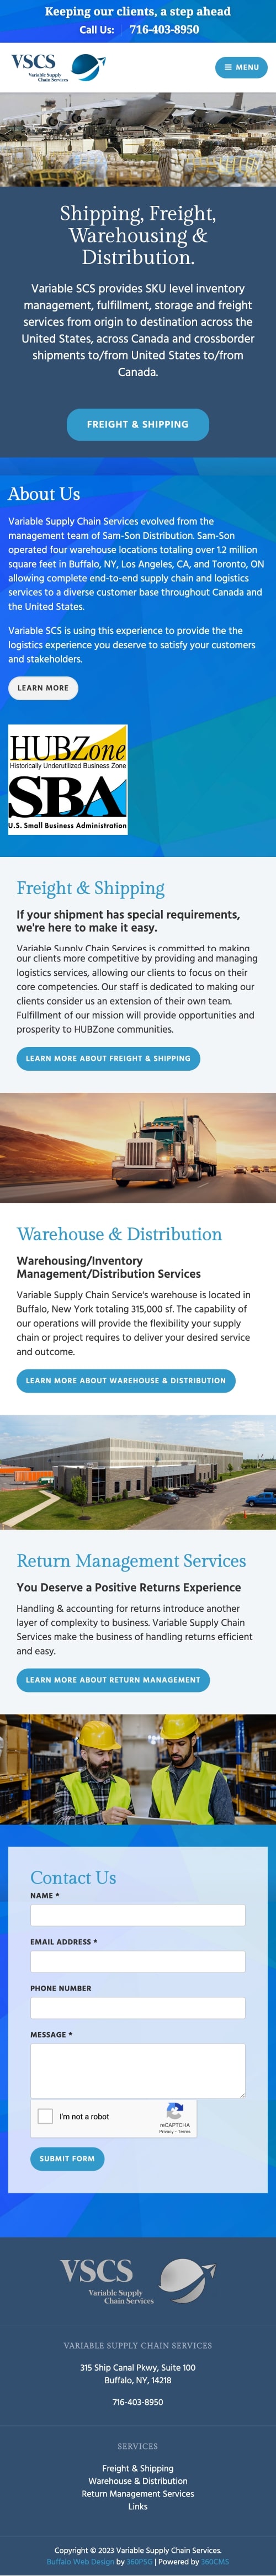 Variable Supply Chain Services Website - Mobile